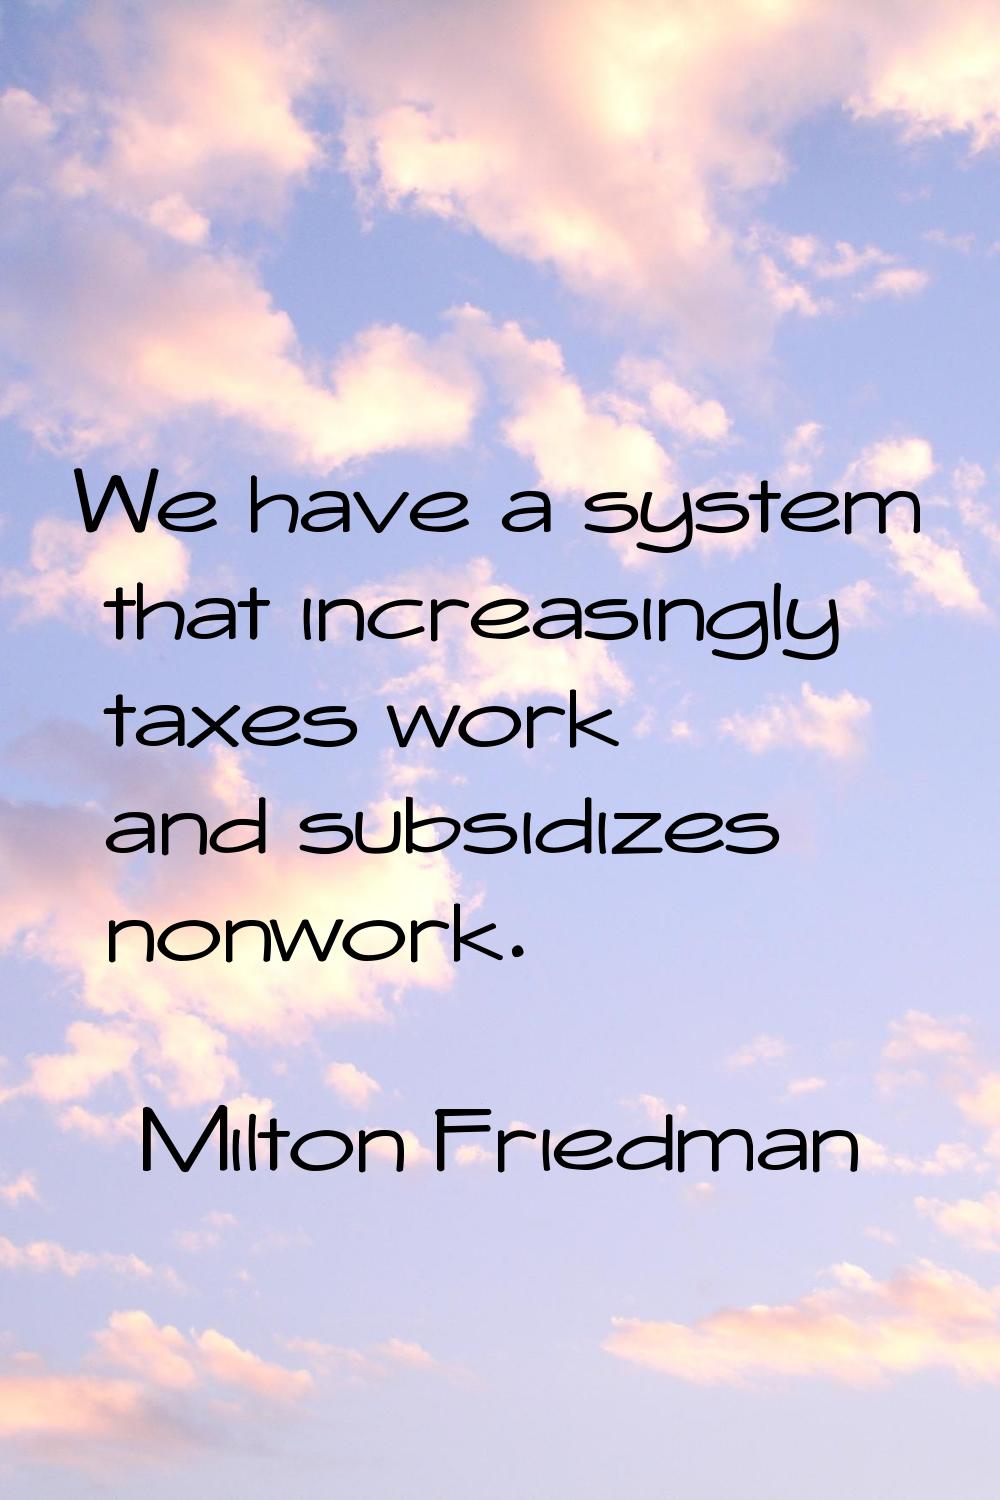 We have a system that increasingly taxes work and subsidizes nonwork.